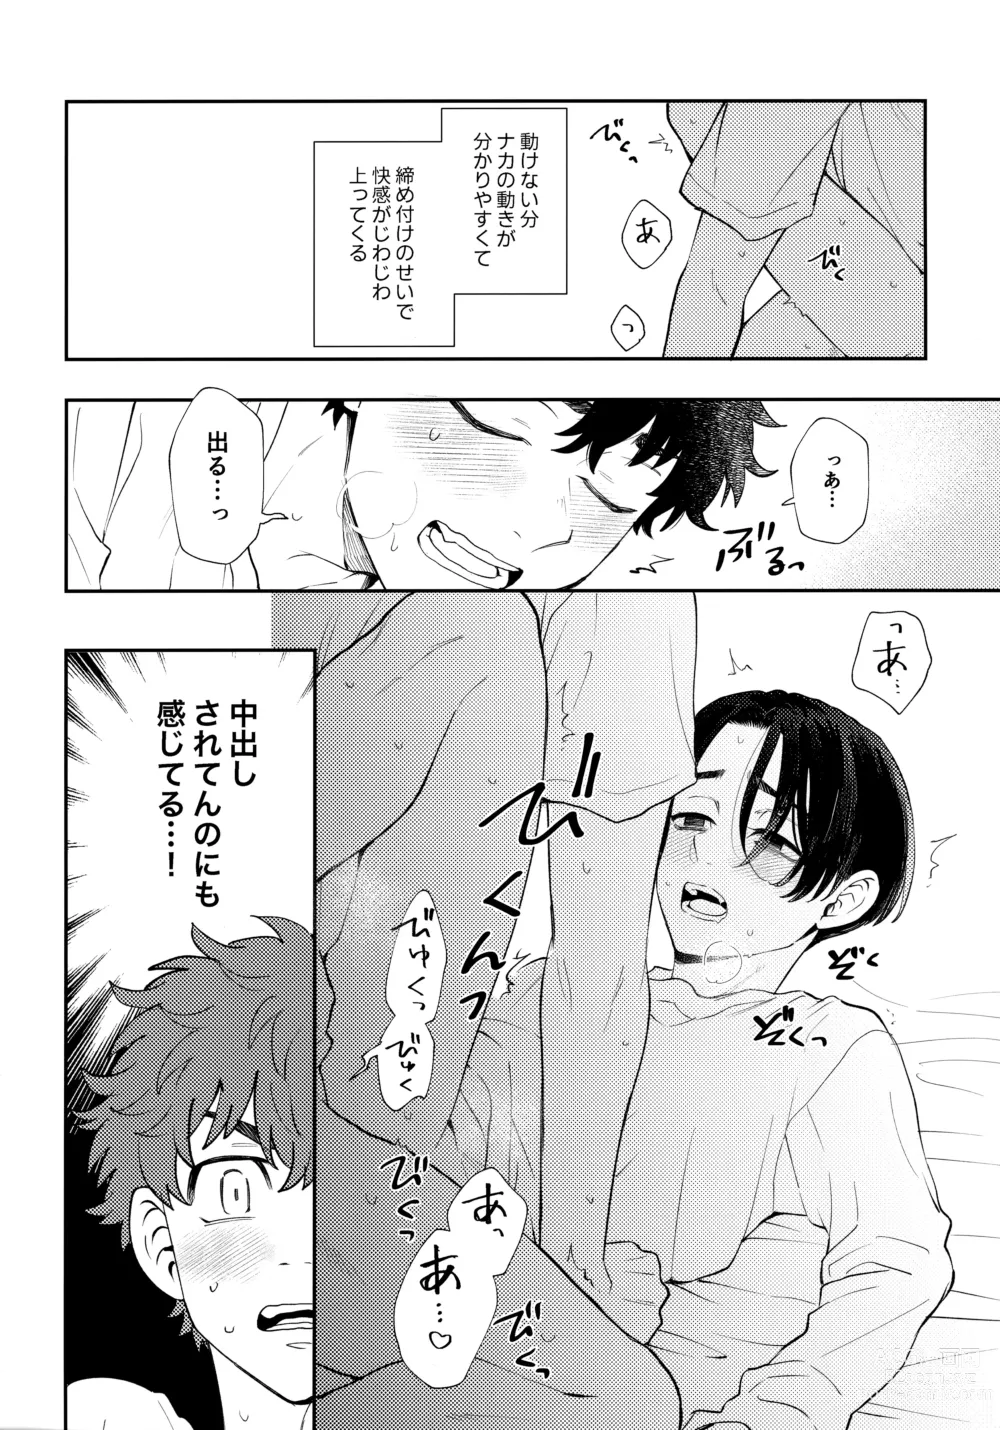 Page 37 of doujinshi Count 5